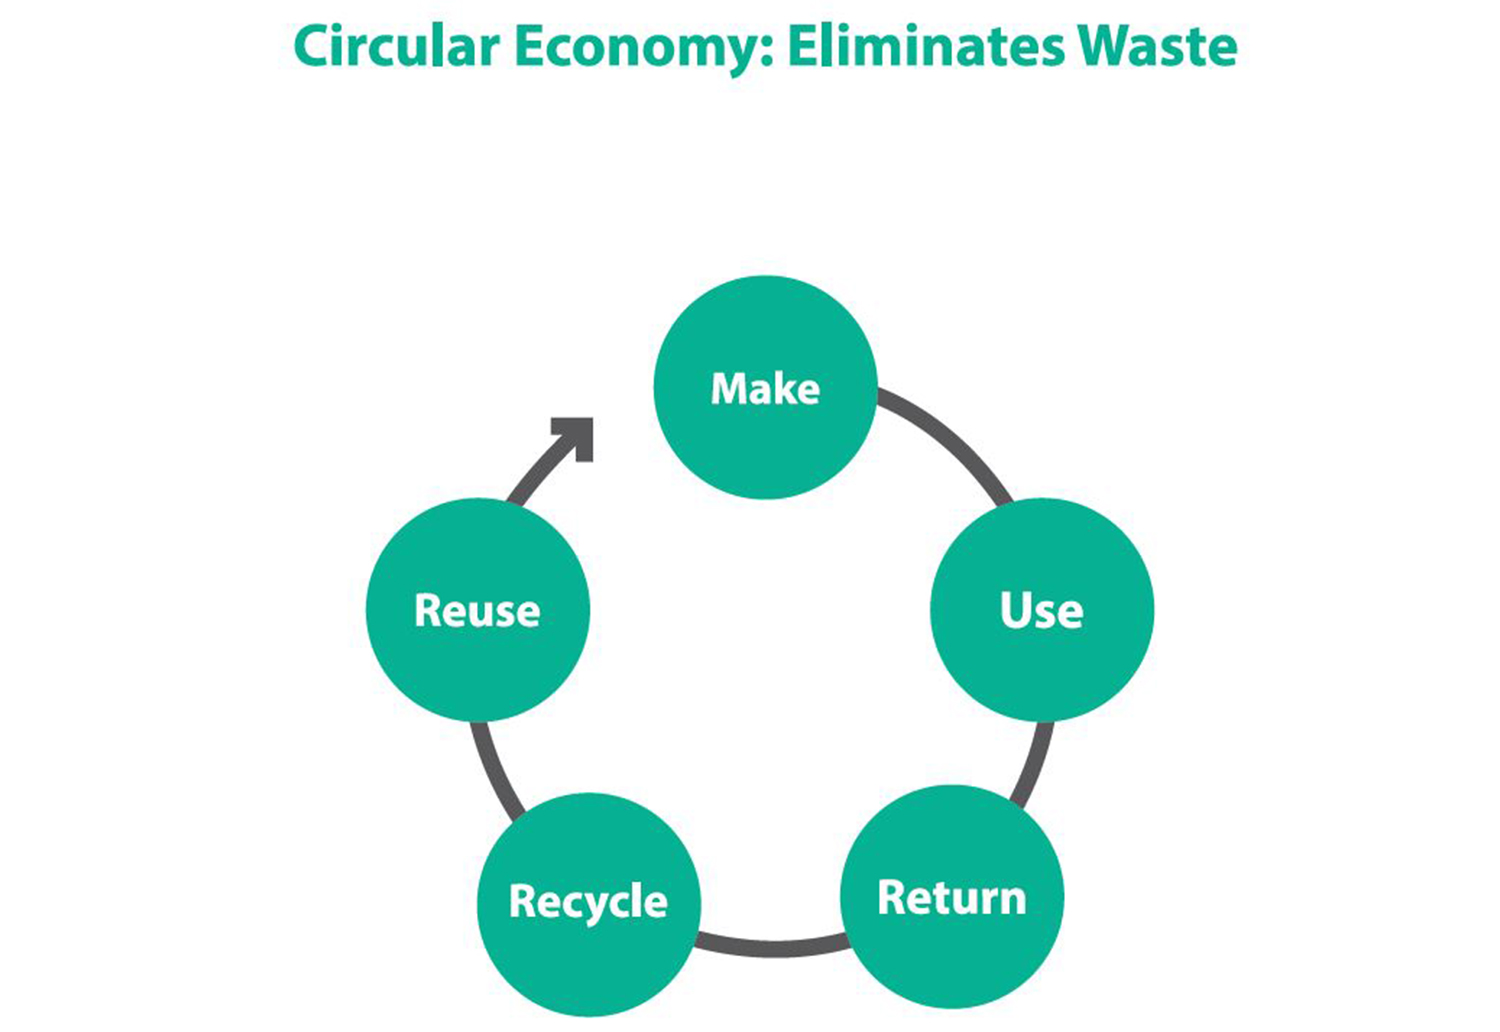 Image or circular economy diagram, showing resources need to be used again and again